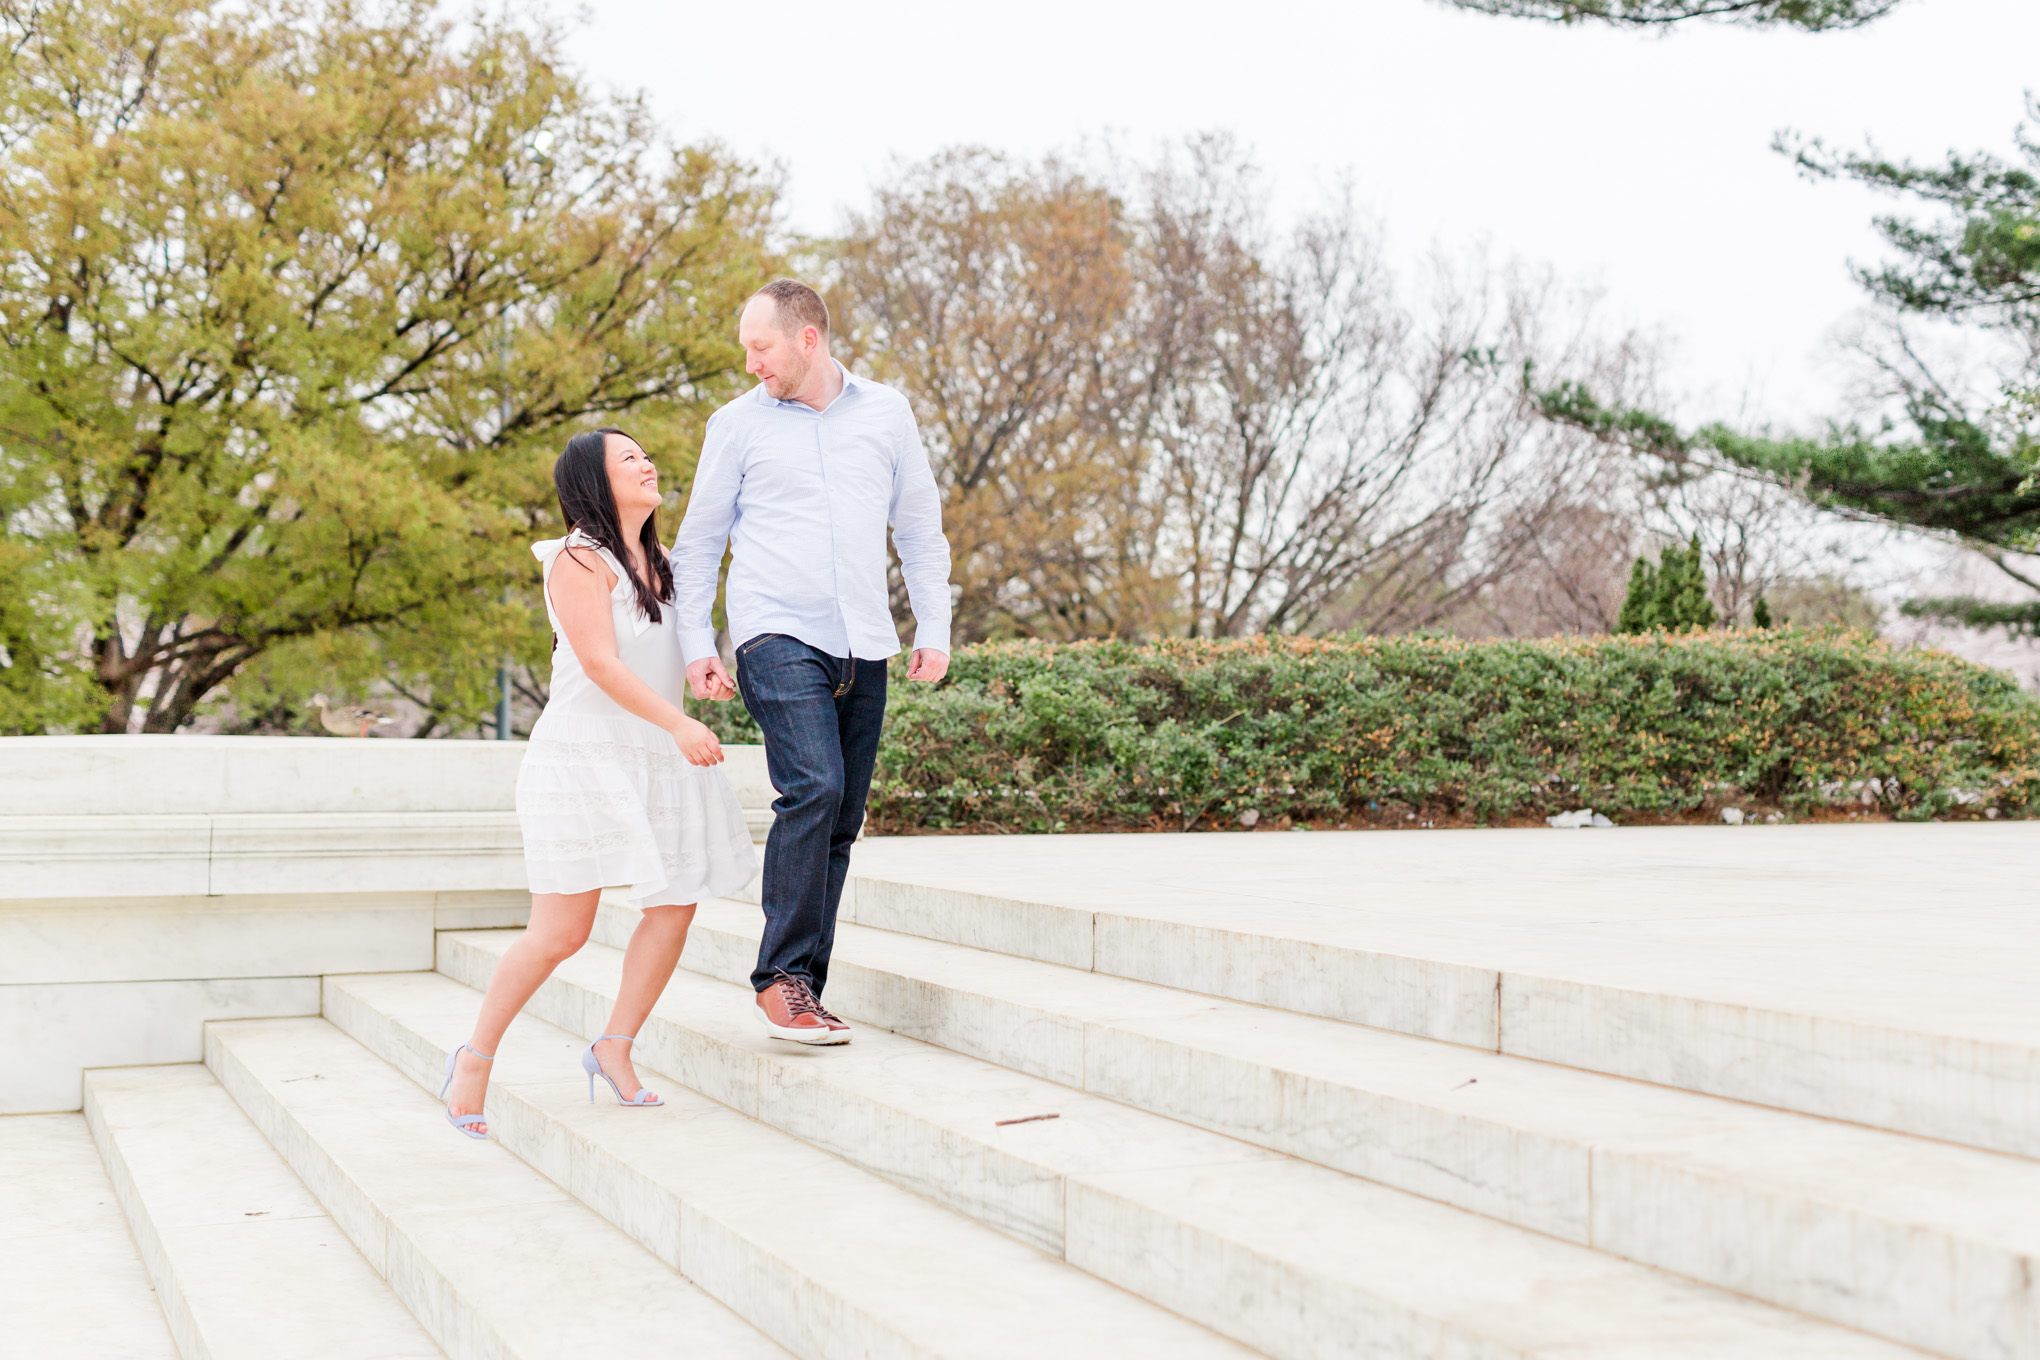 engaged couple, engagement portraits, photo shoot outfit ideas, cherry blossom engagement portraits, cherry blossom portraits, cherry blossoms, DC cherry blossoms, tidal basin, DC tidal basin, white cotton dress, white cotton sleeveless dress, bow sleeves, classic cherry blossom engagement session, Washington Monument, Jefferson Memorial, Jefferson Memorial engagement photos, engagement ring, D.C. engagement photographer, couple walking